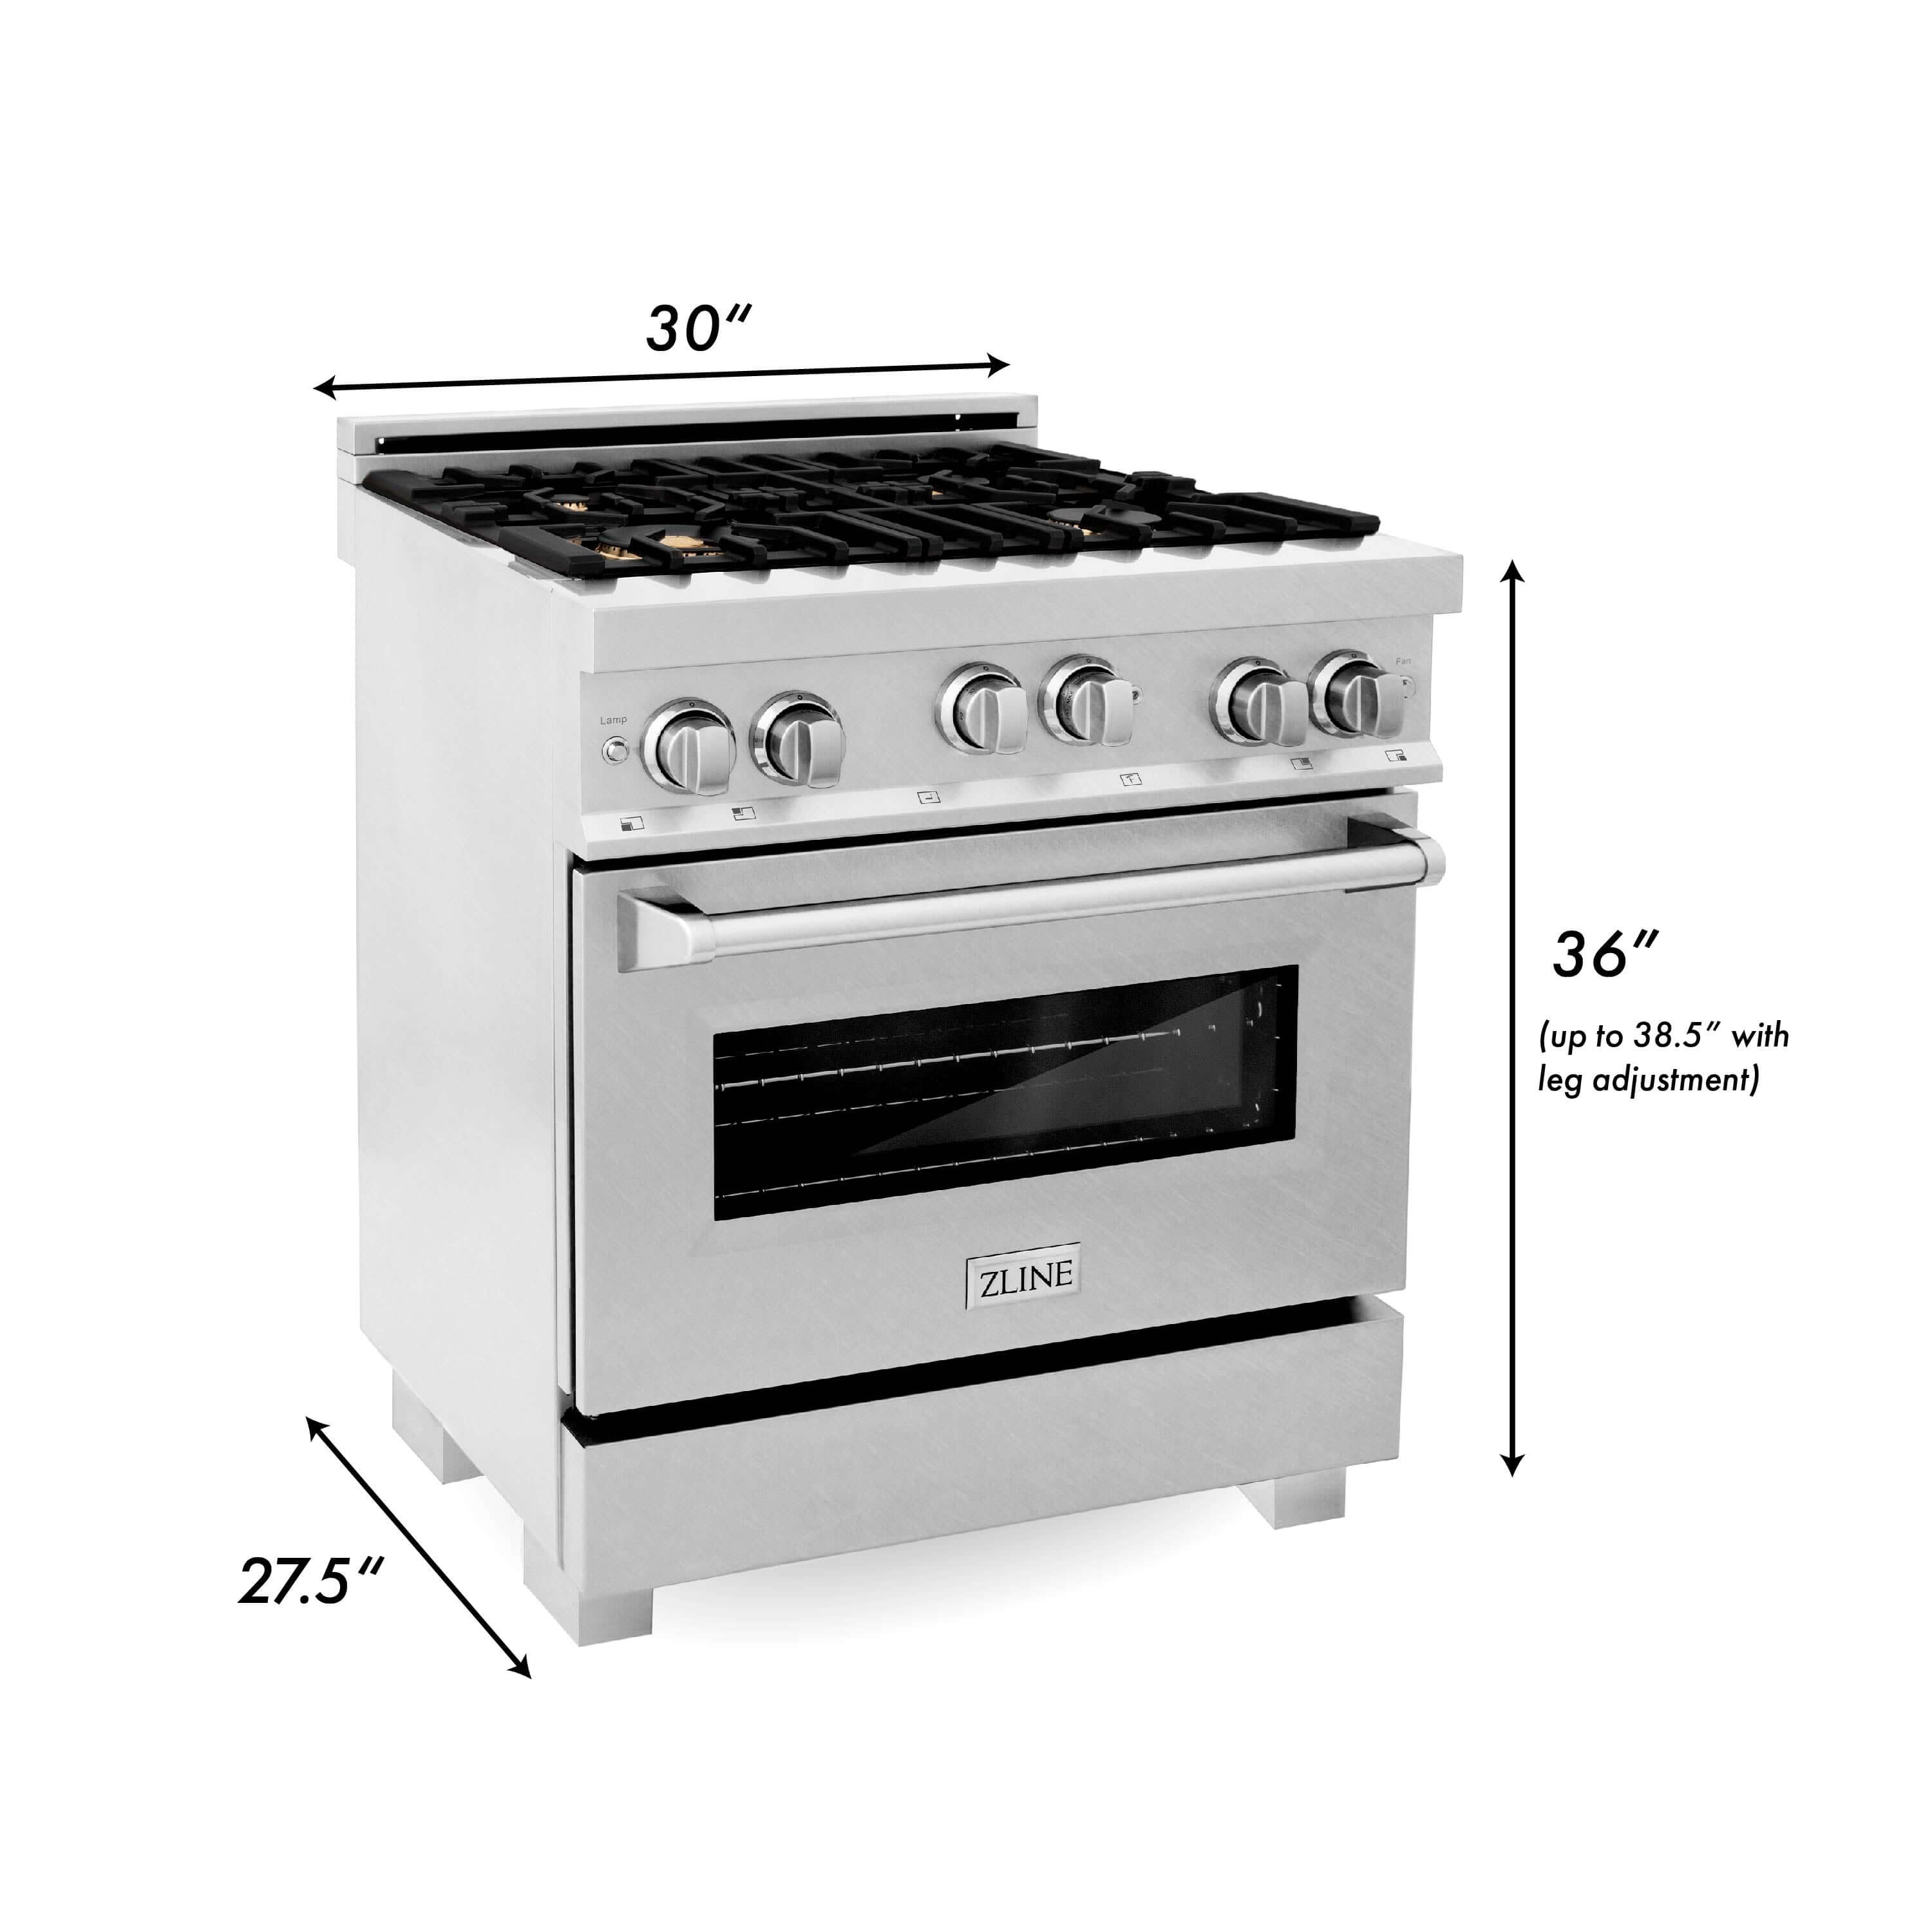 ZLINE 30 in. 4.0 cu. ft. Gas Oven and Gas Cooktop Range with Griddle and Brass Burners in Fingerprint Resistant Stainless Steel (RGS-SN-BR-GR-30)